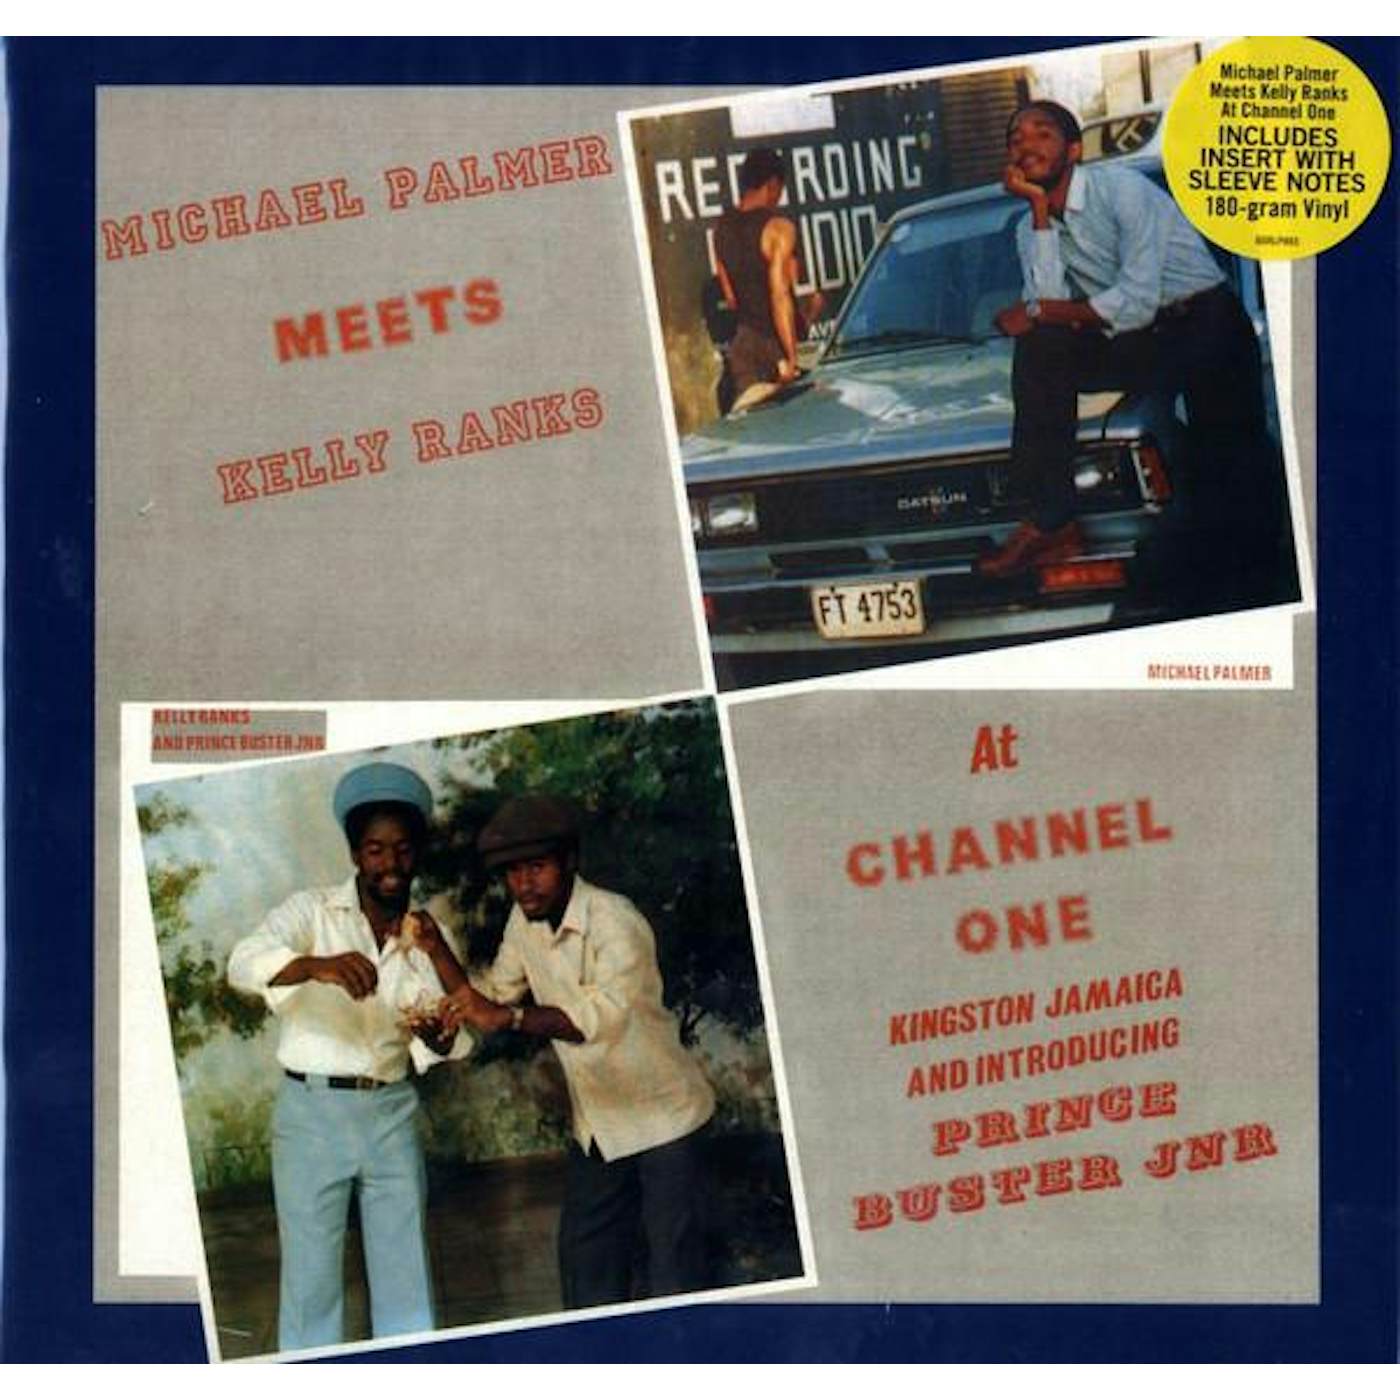 Michael Palmer MEETS KELLY RANKS AT CHANNEL ONE (180G) Vinyl Record